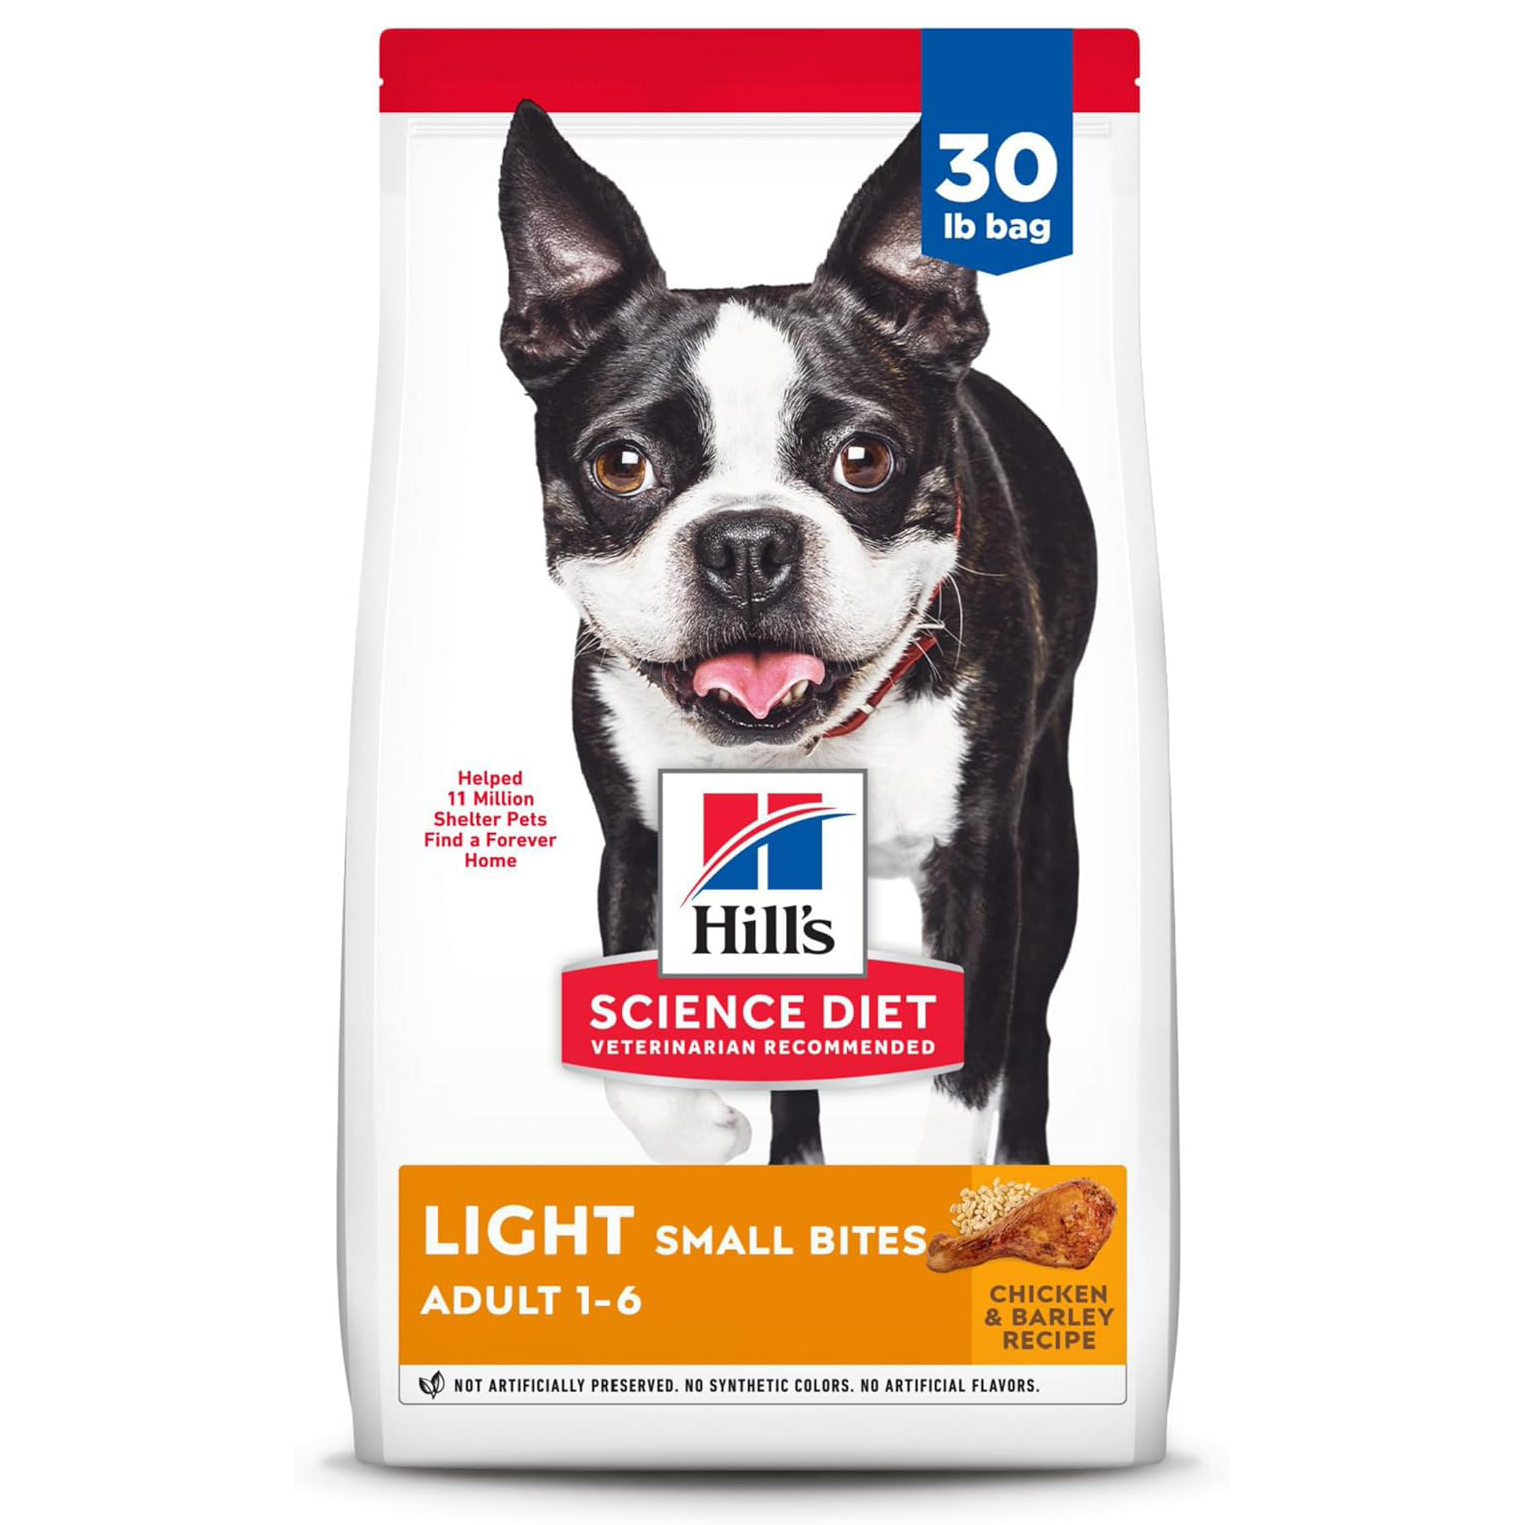 Hill’s Science Diet Adult Dry Dog Food